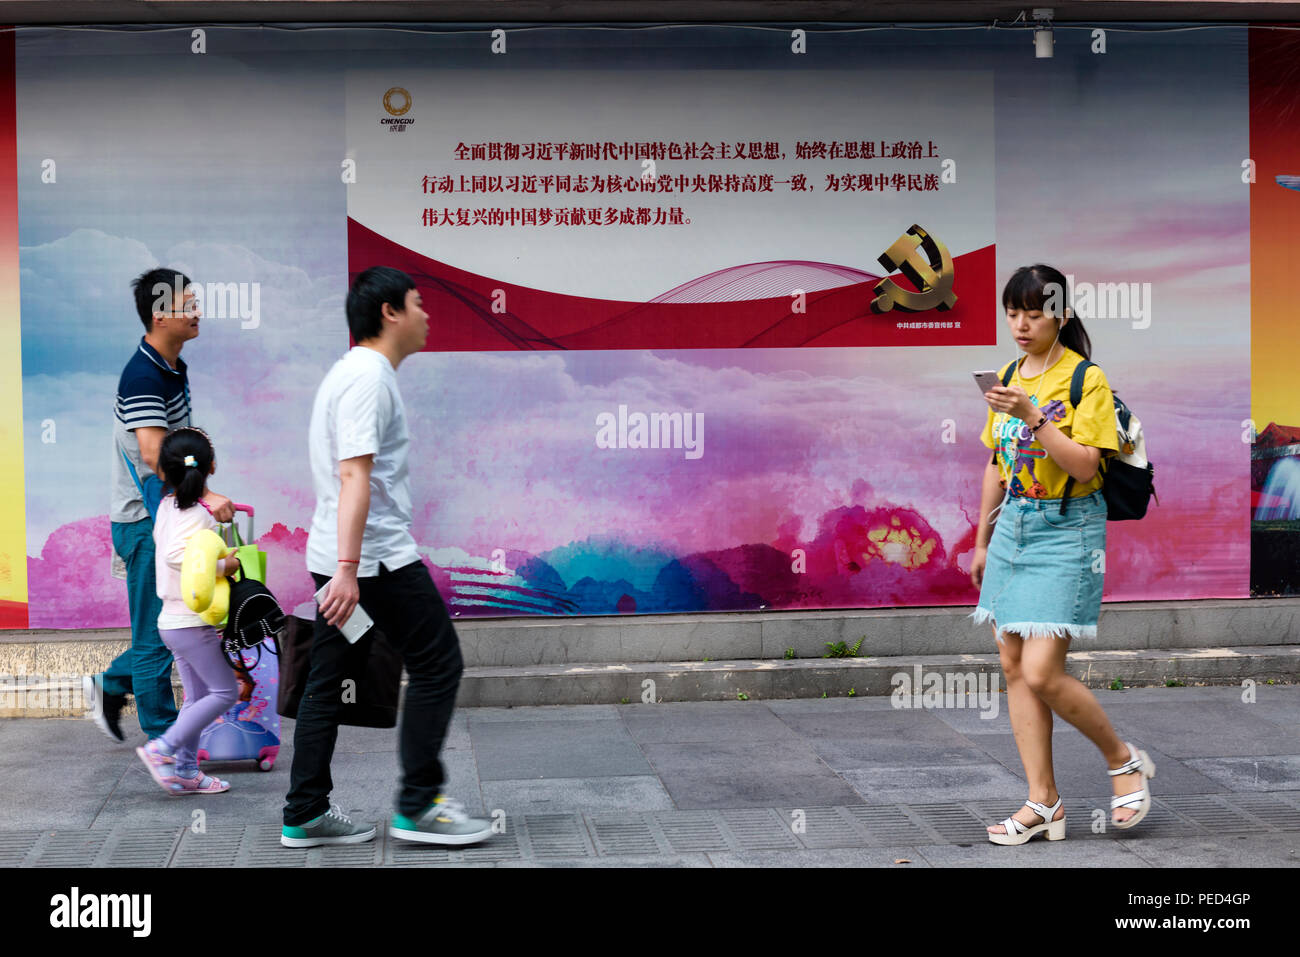 Bus Stop Ads in China Stock Photo